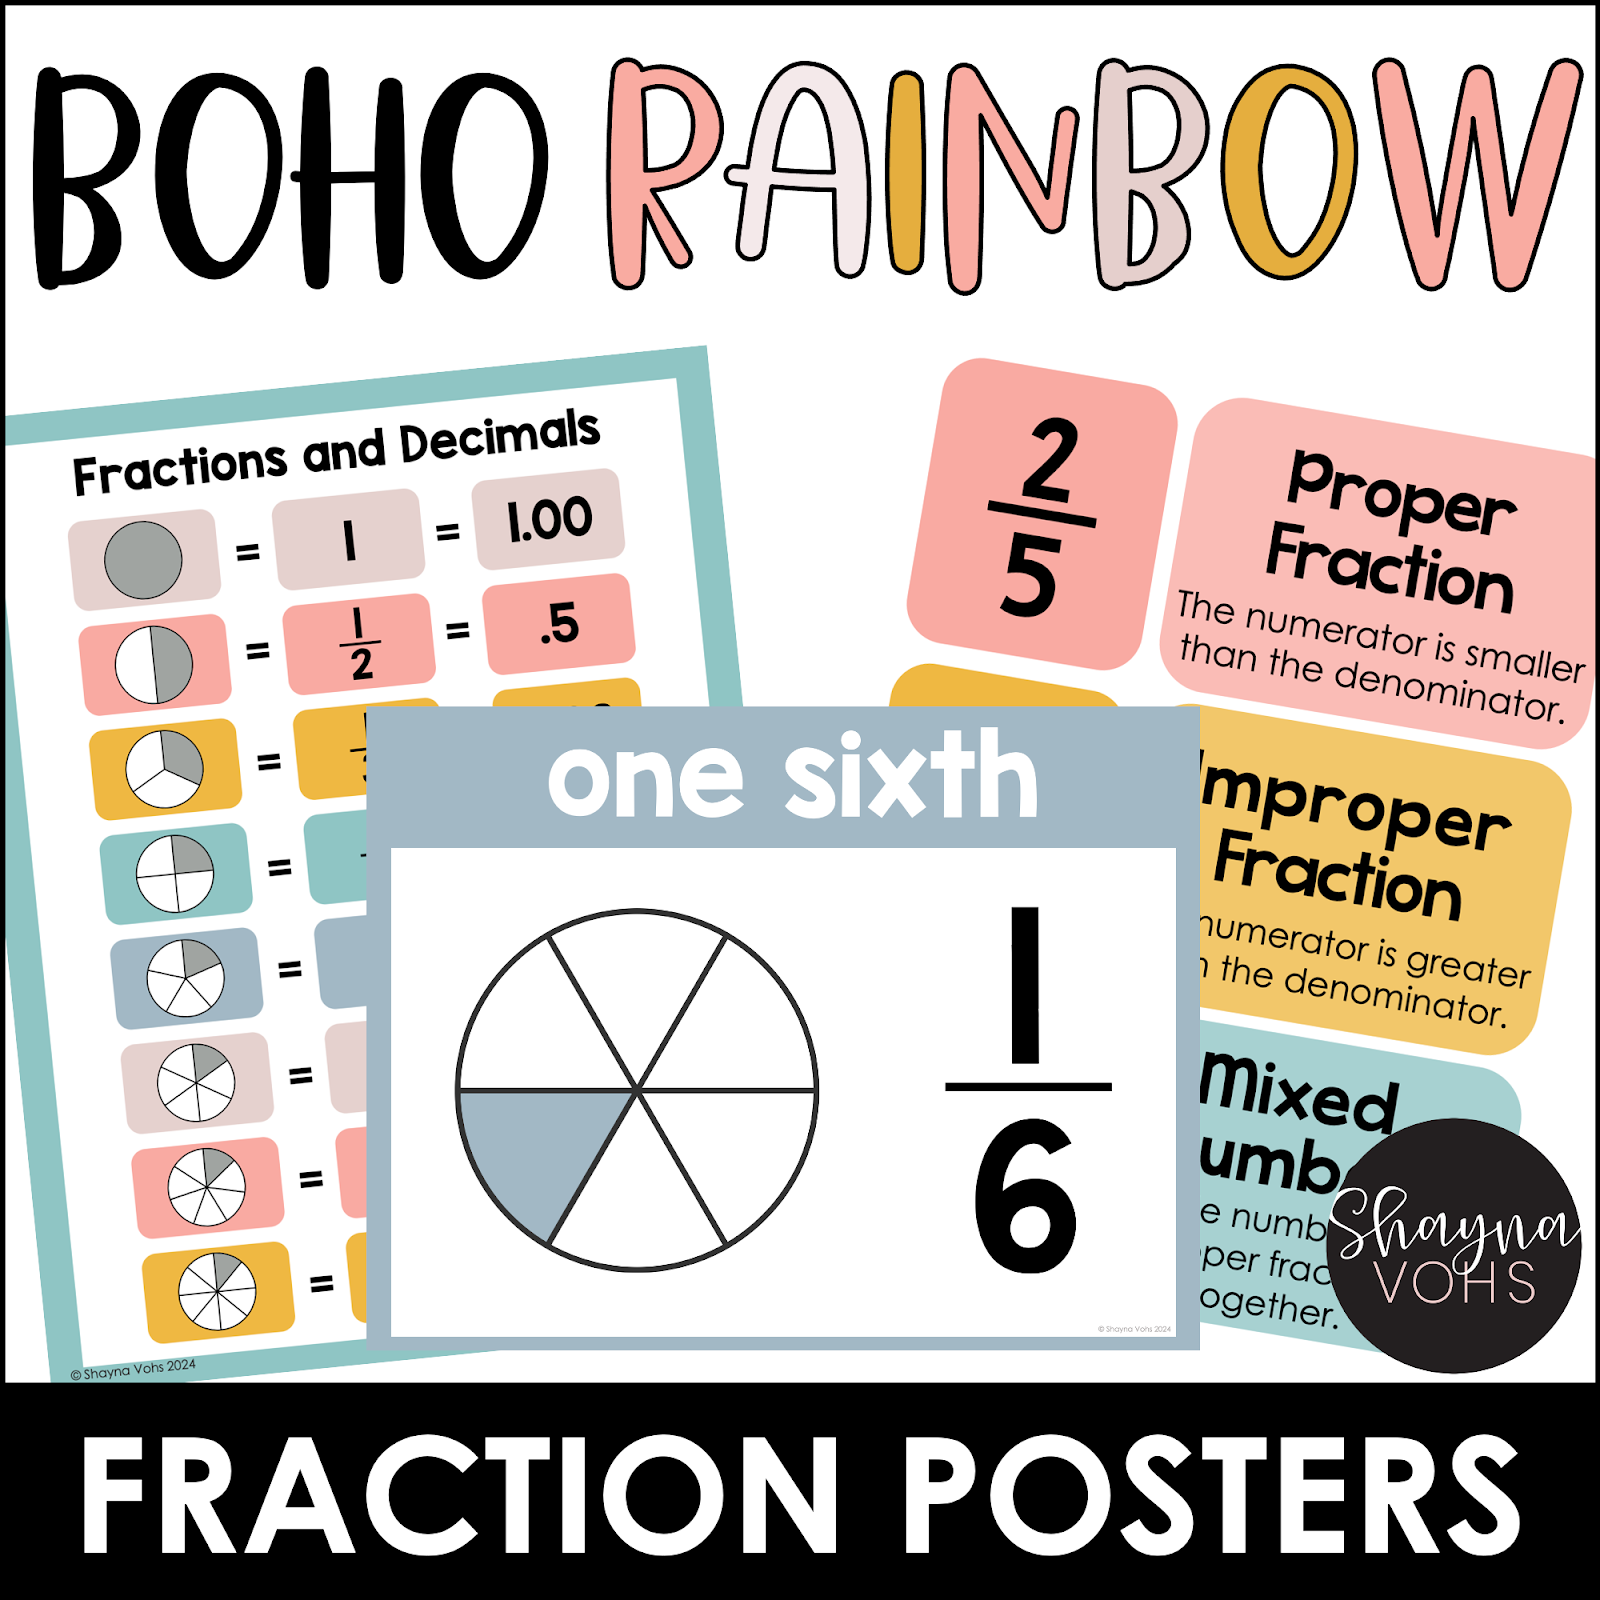 This image shows fraction posters in a Boho Rainbow color scheme. 